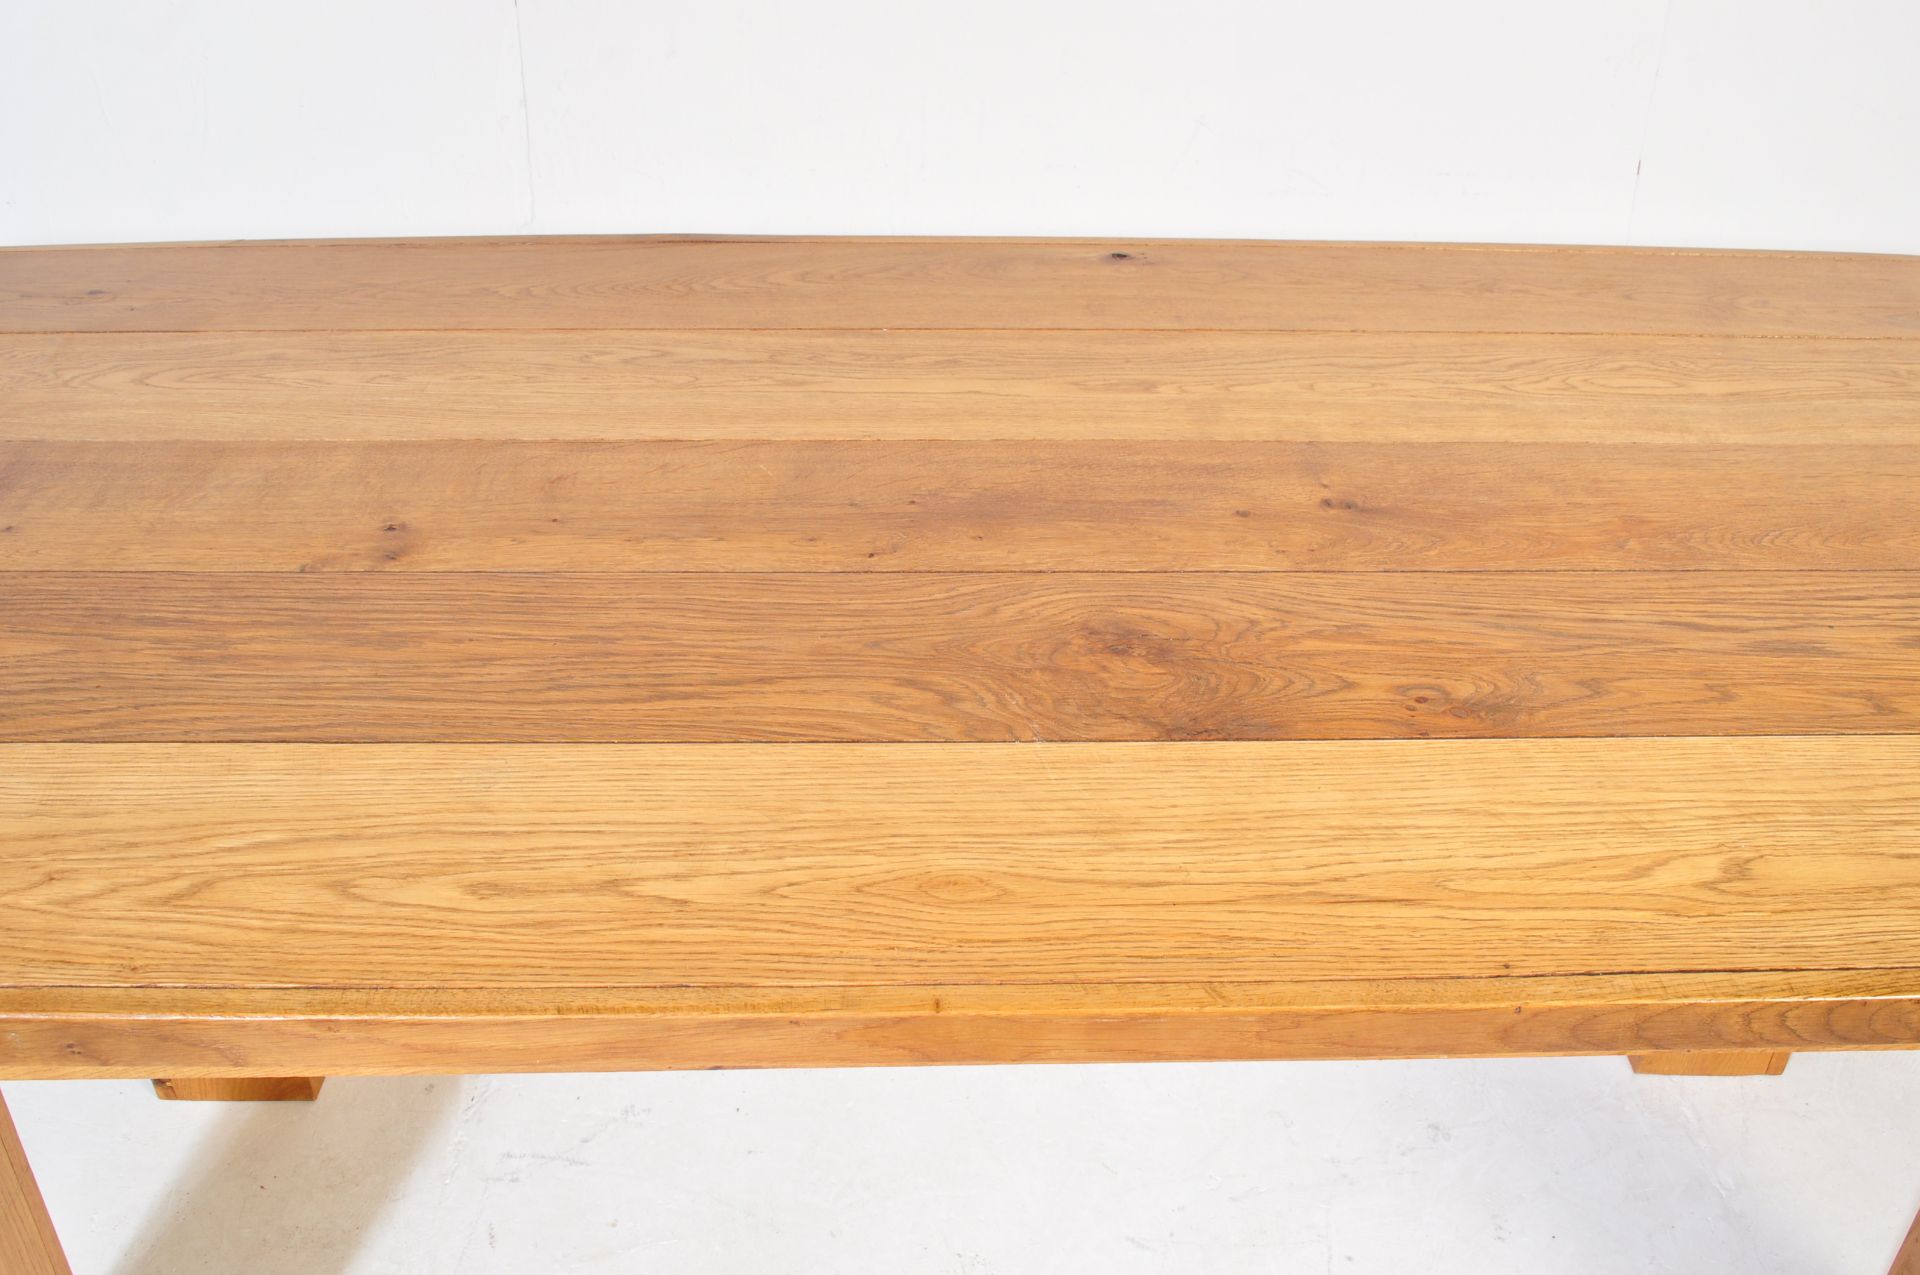 LARGE CONTEMPORARY MODERNIST OAK REFECTORY DINING TABLE - Image 3 of 4